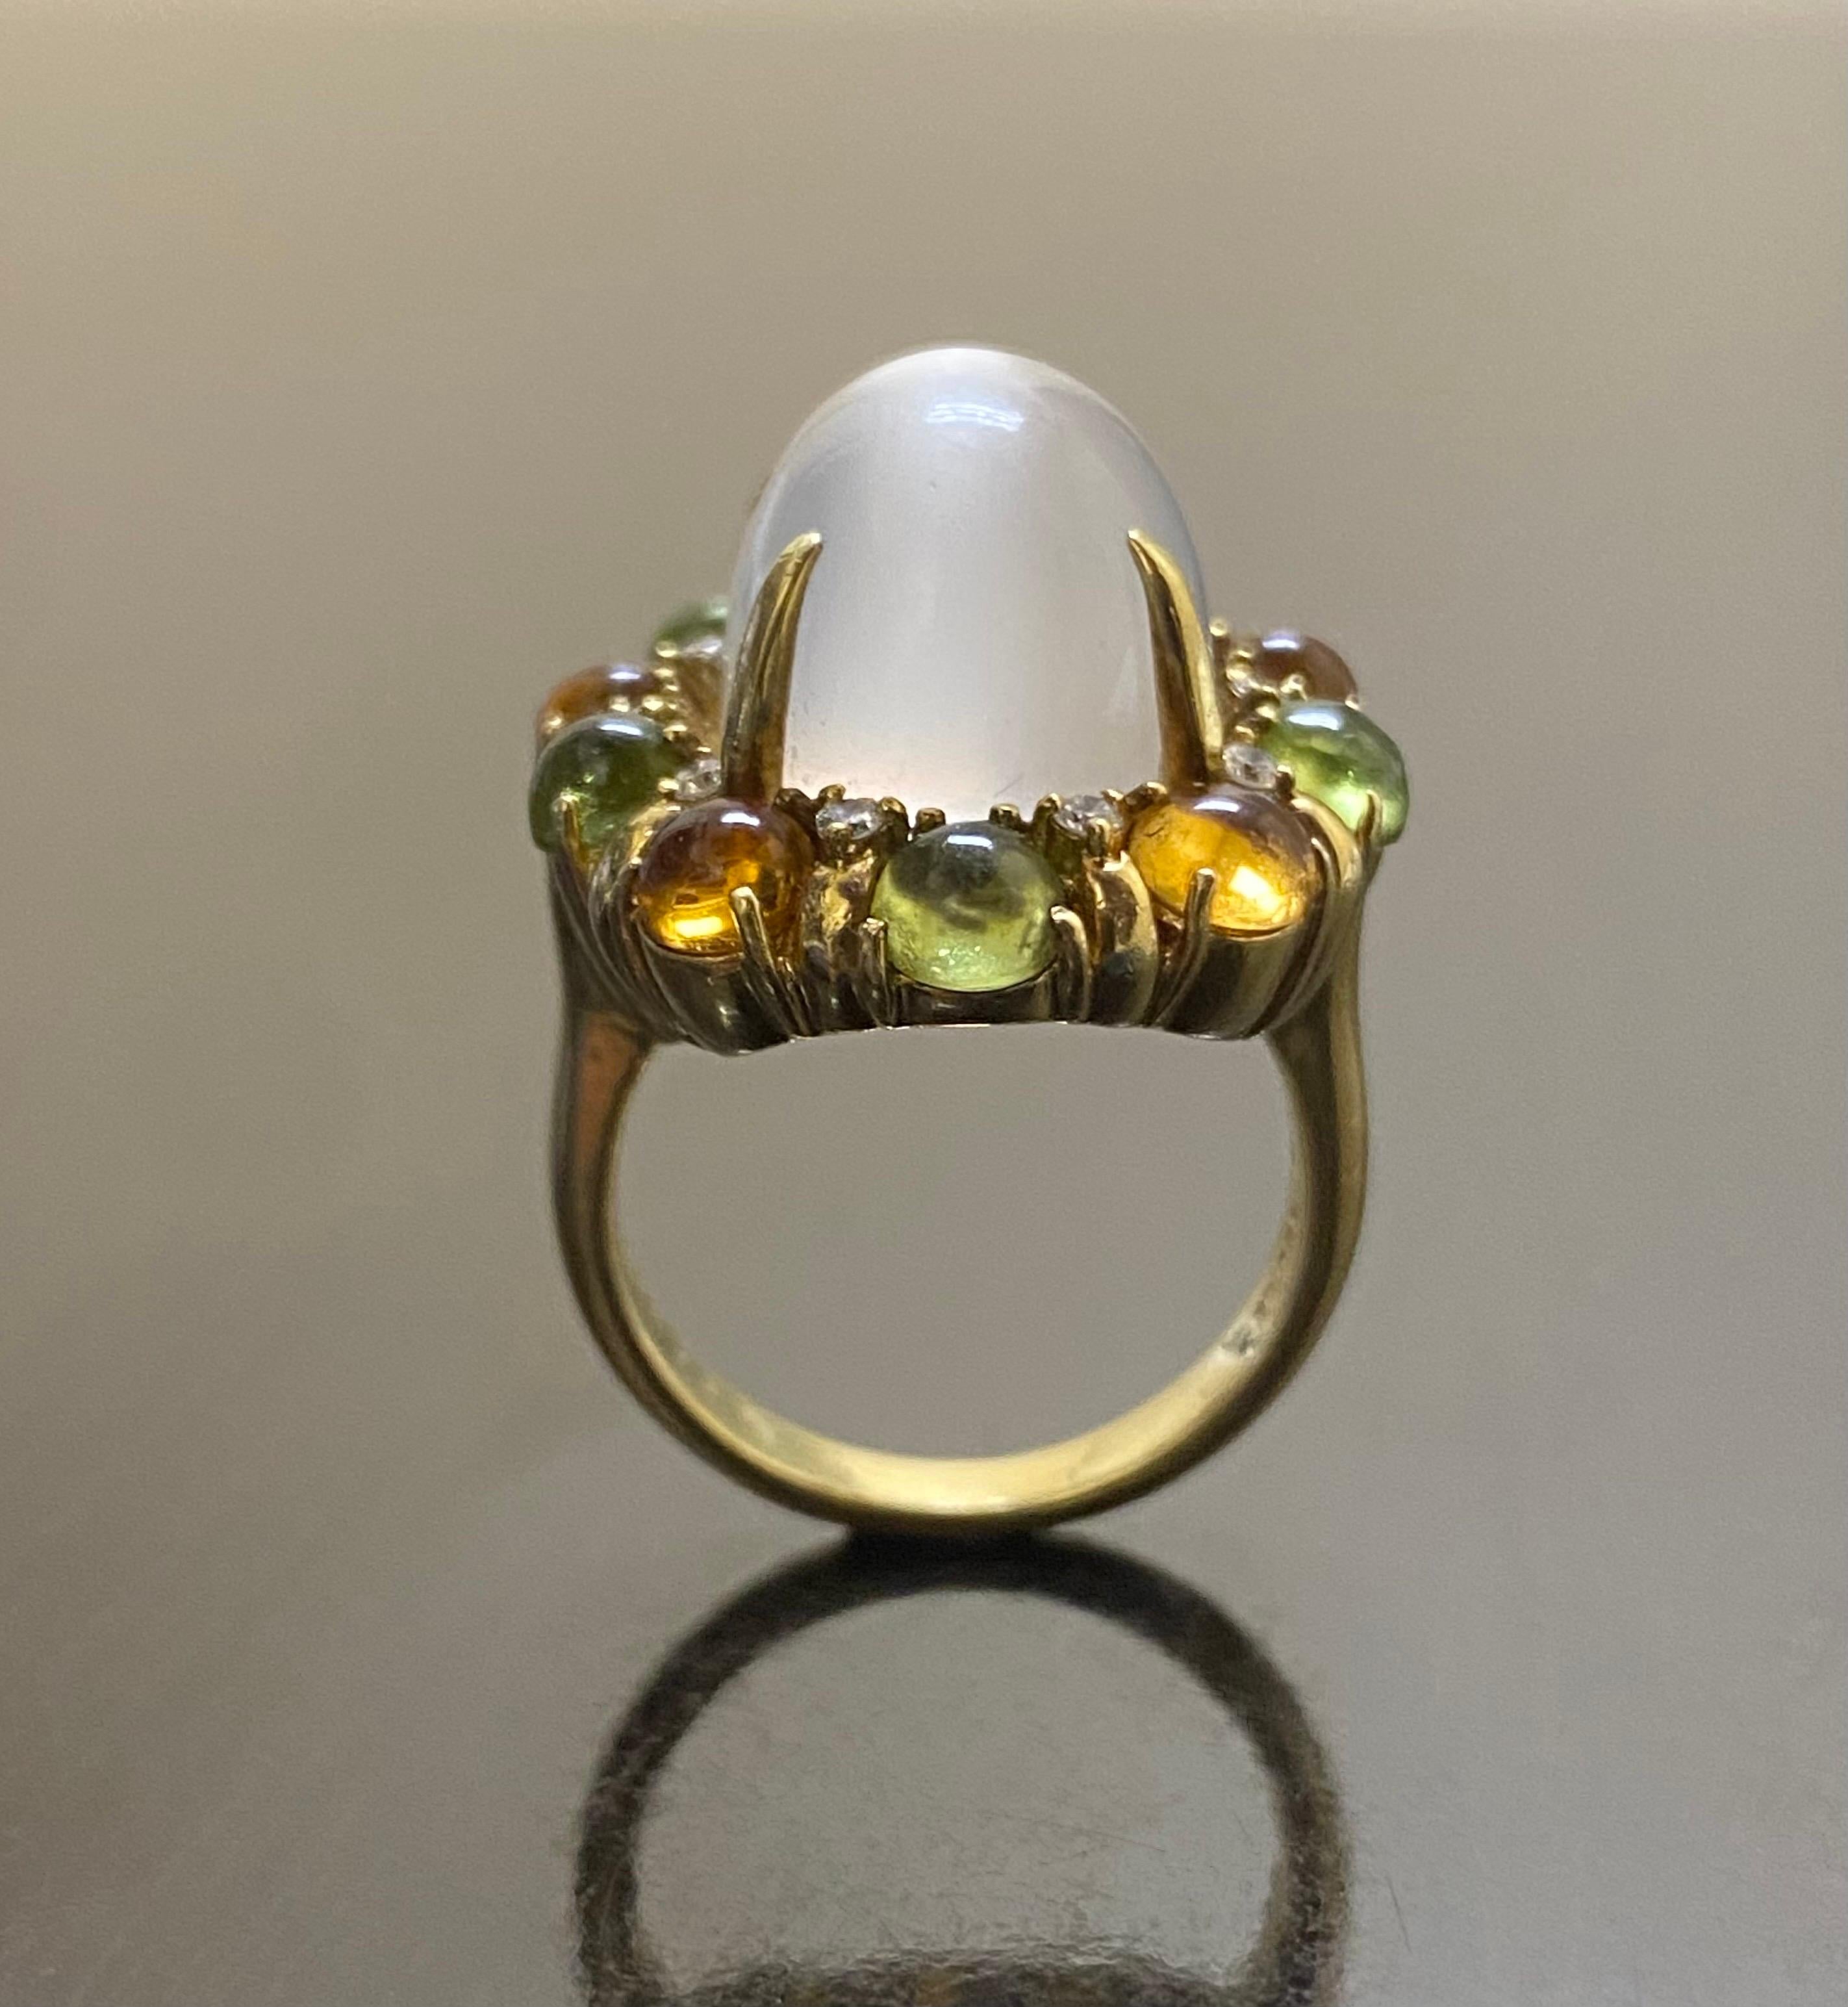 DeKara Designs Collection

Art Deco Inspired Extremely Elegant Handmade Cabochon Citrine and Cabochon Peridot Diamond Moonstone Engagement Ring.

Metal- 18K Yellow Gold, .750.

Stones- 1 Genuine Oval Cabochon Moonstone 13.30 Carats, 5 Round Cabochon